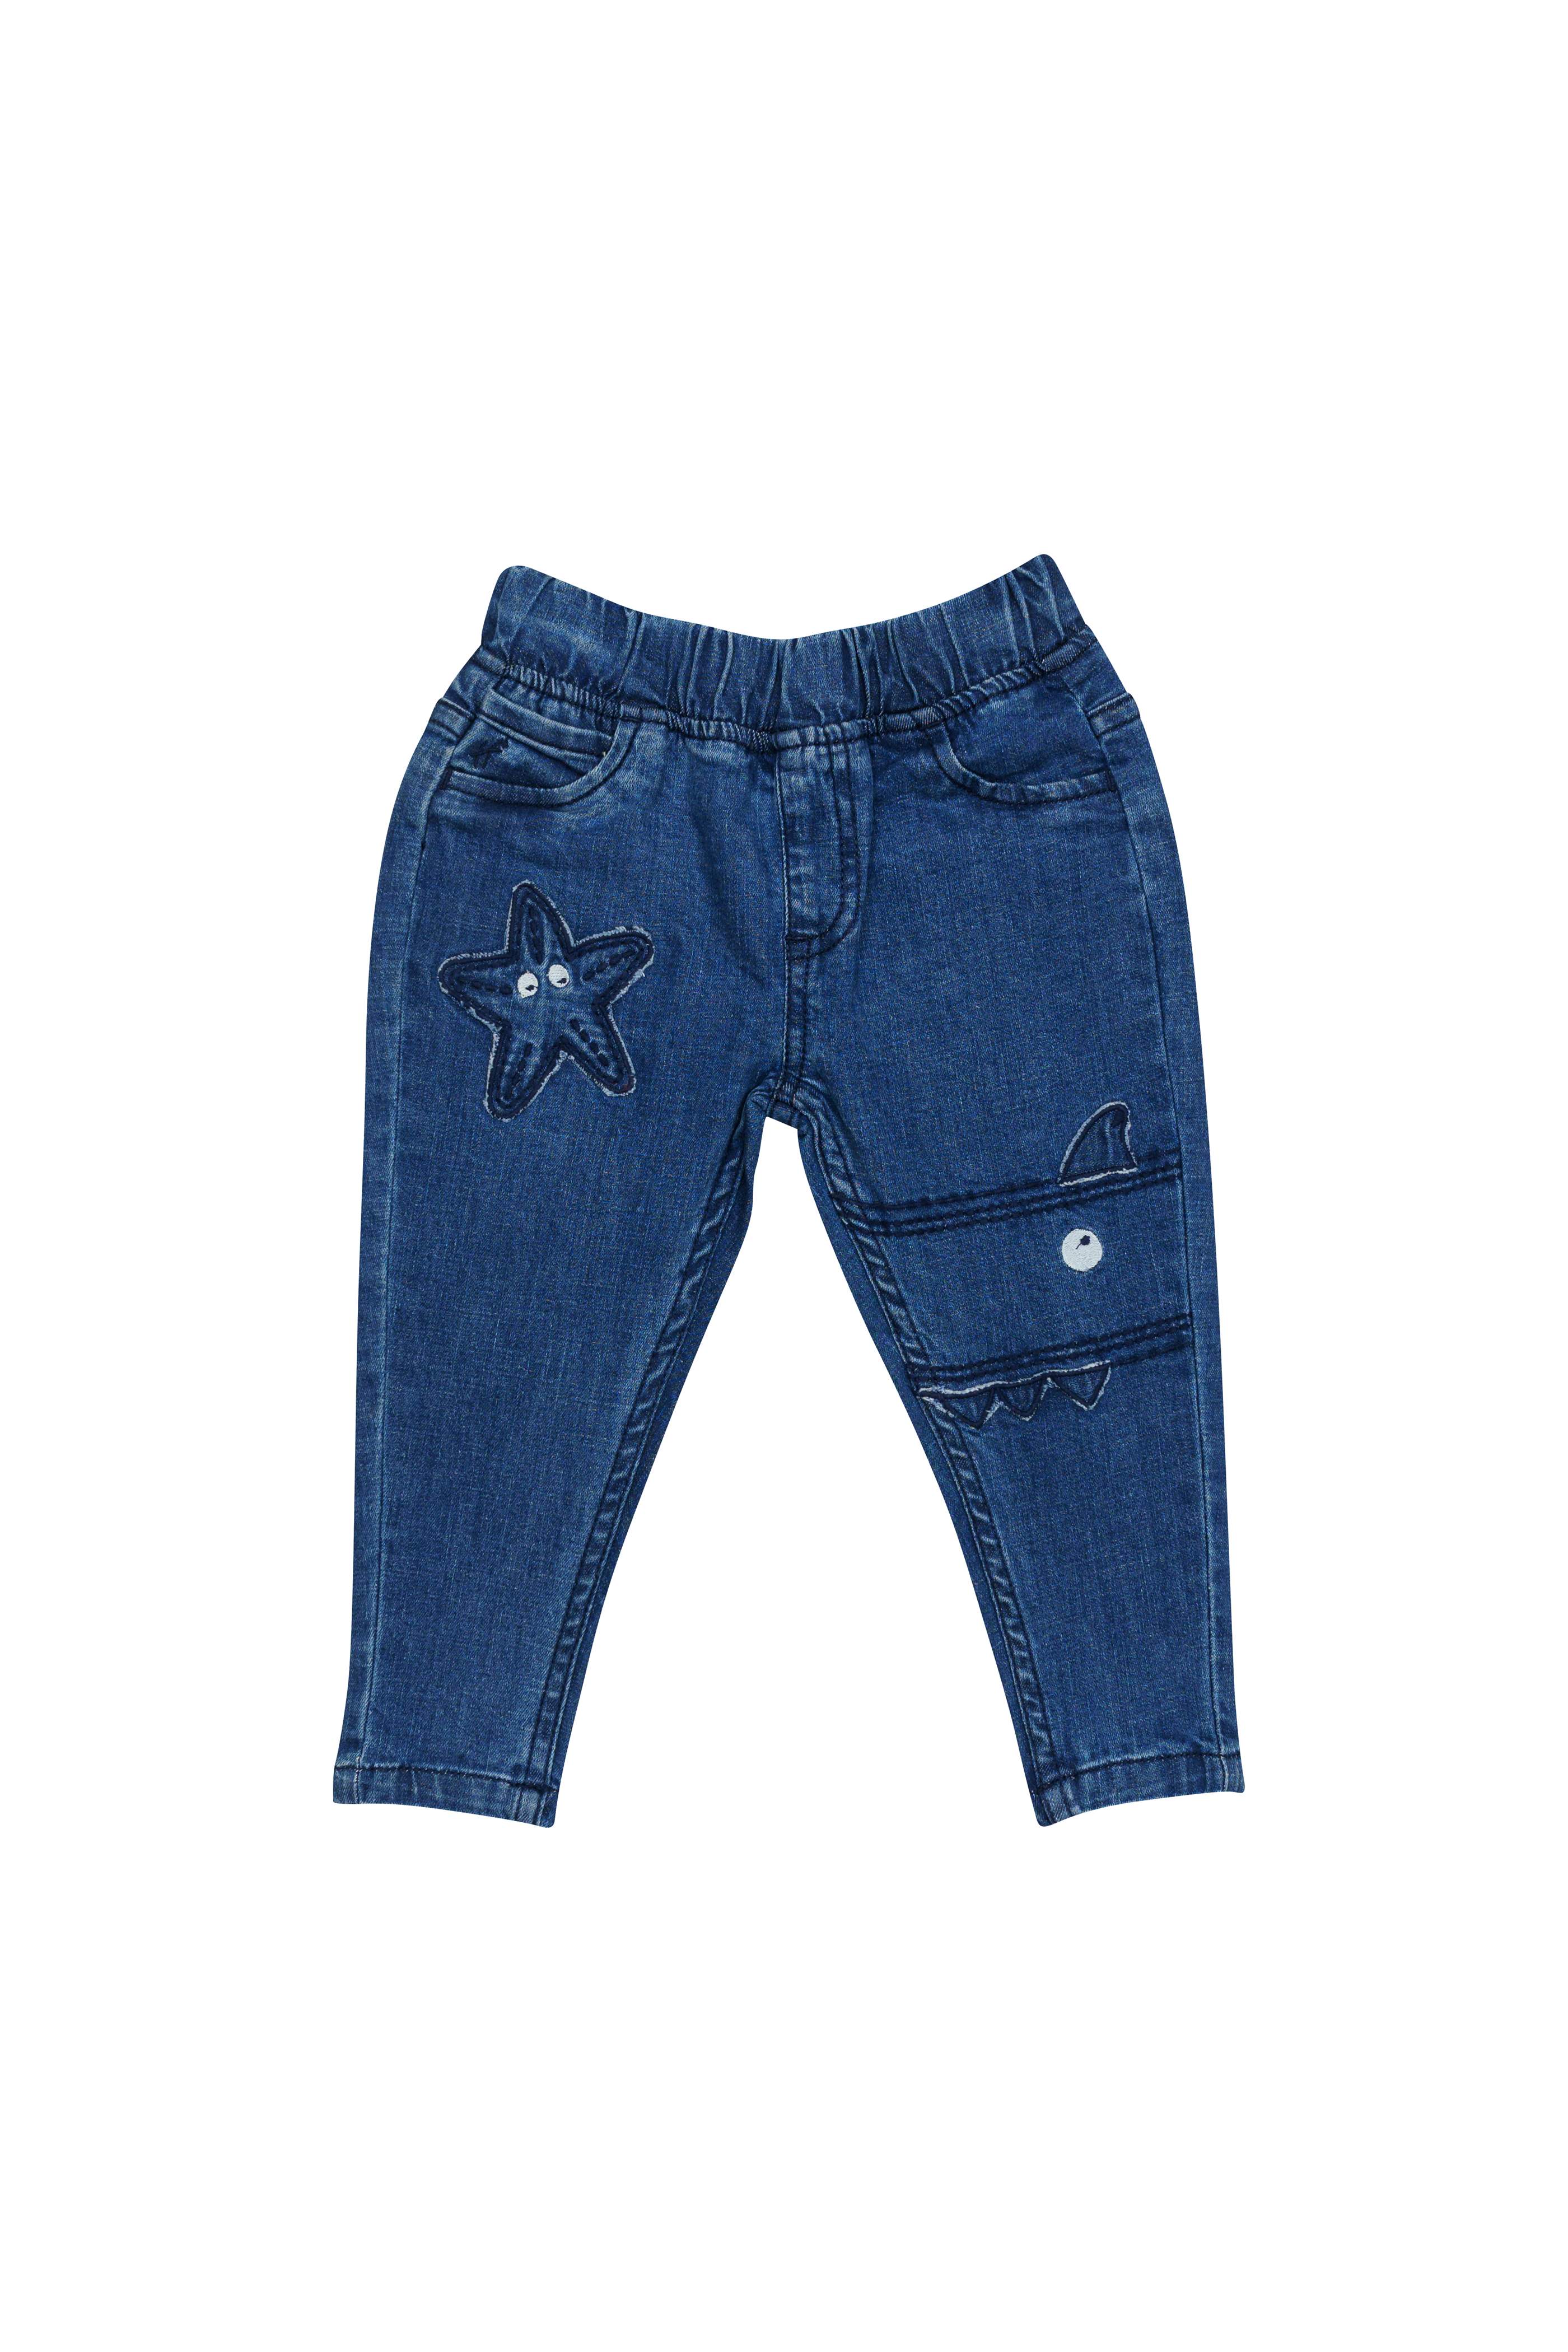 H by Hamleys Infant Boys Embroidered Blue Jeans